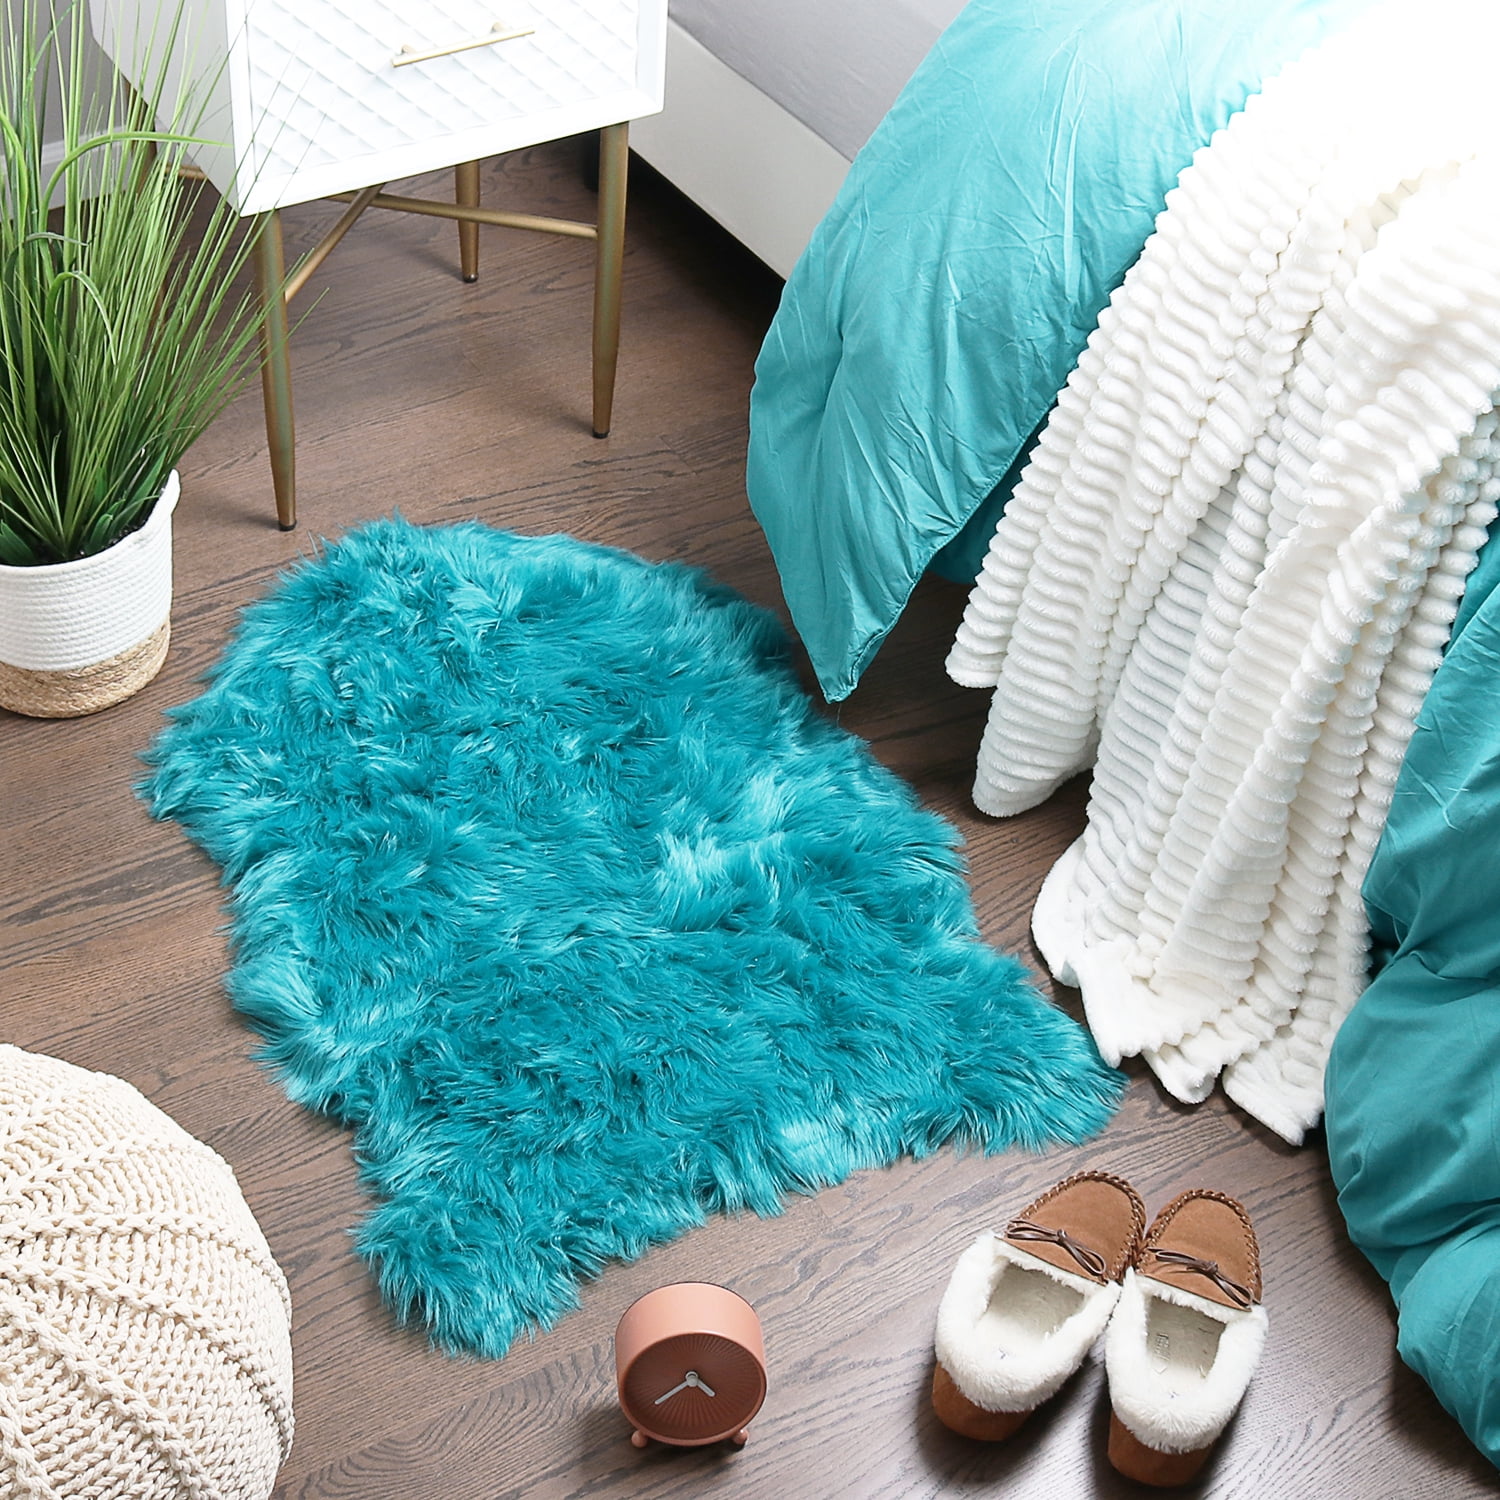 Details about   Fluffy Faux Fur Wool Area Rugs Hairy Shaggy Plain Carpet Floor Bedroom Home Mat. 